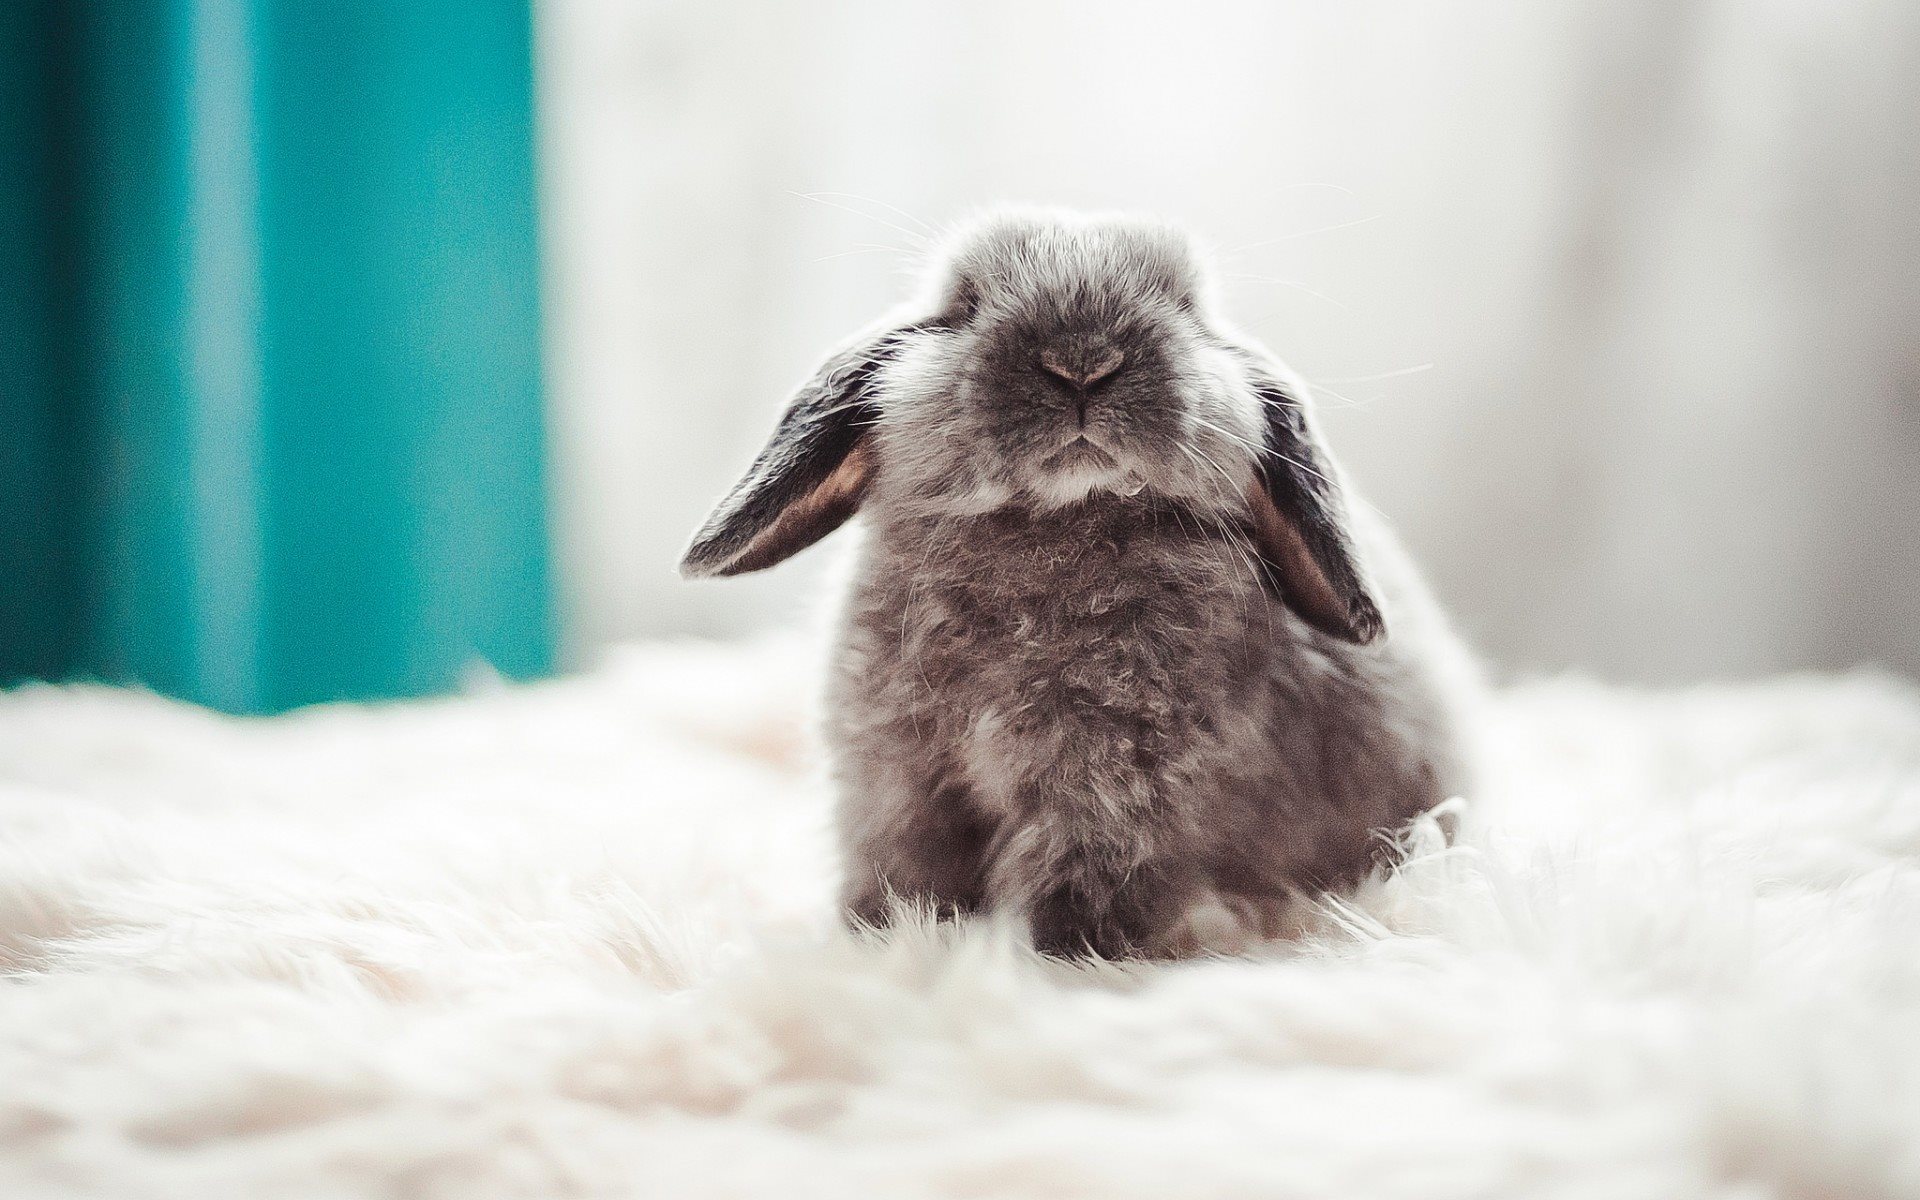 Download wallpaper cute rabbit, fluffy bunny, cute animal for desktop with resolution 1920x1200. High Quality HD picture wallpaper